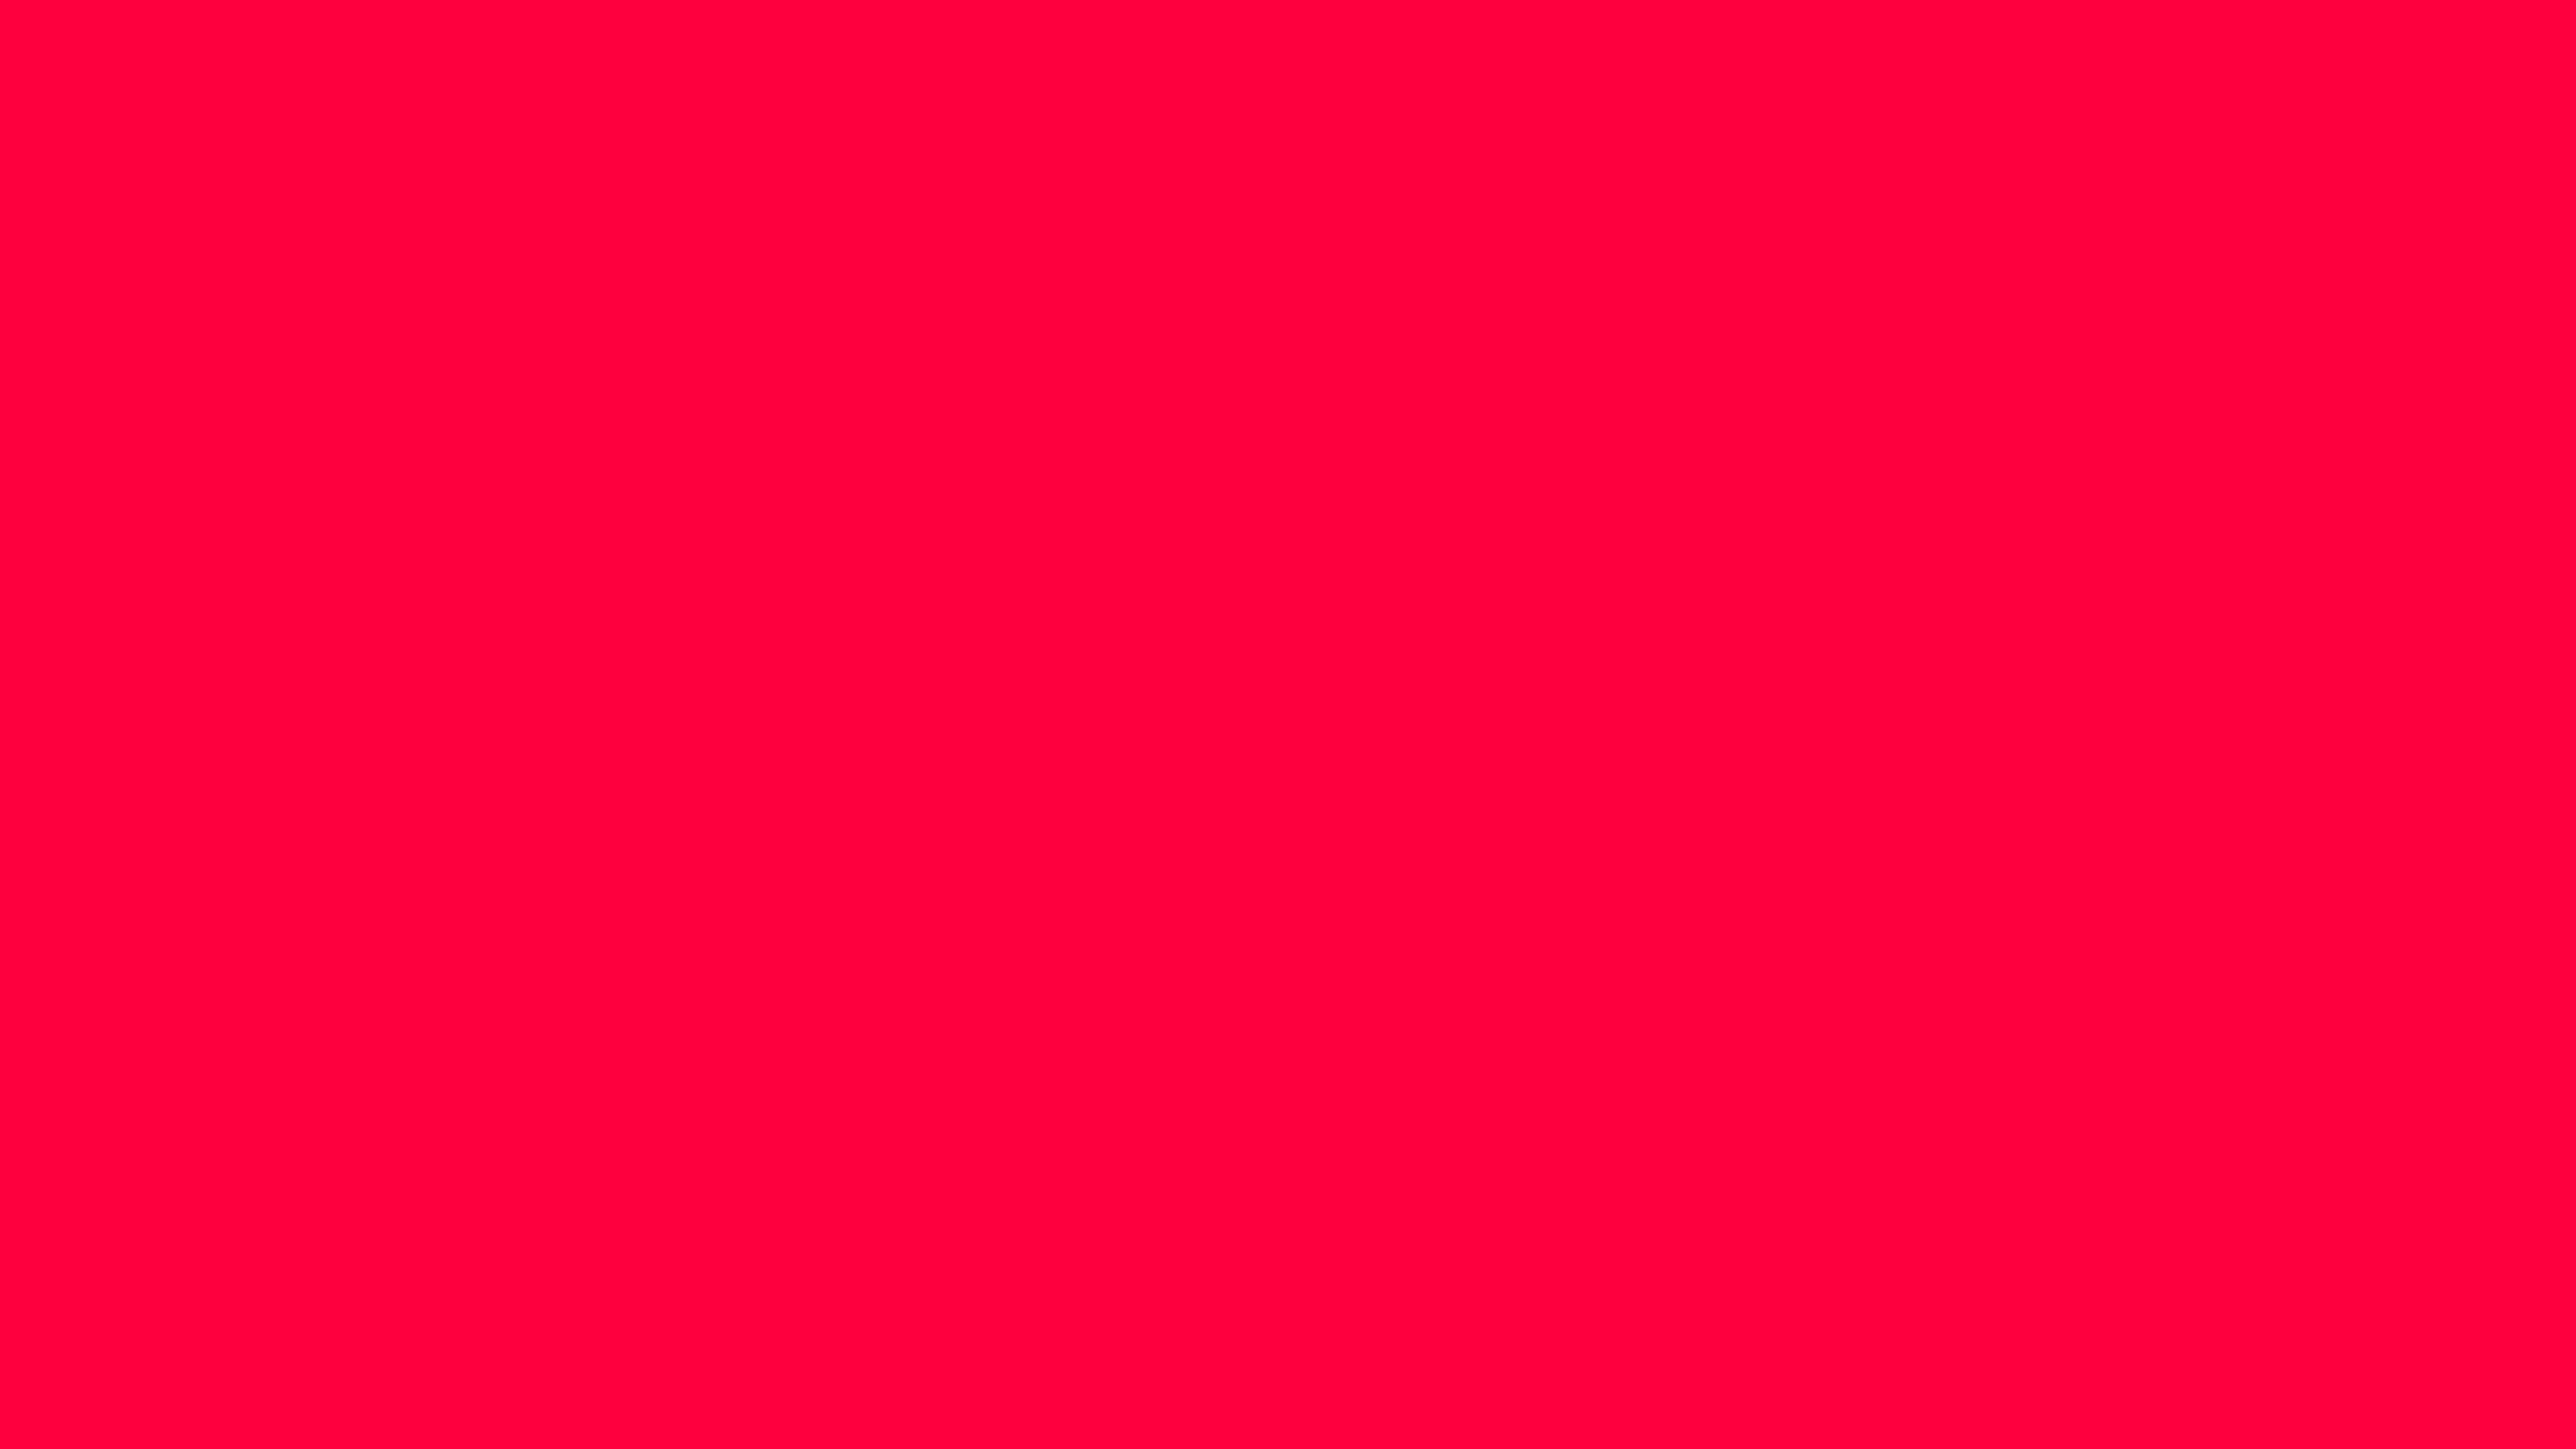 4096x2304 Electric Crimson Solid Color Background